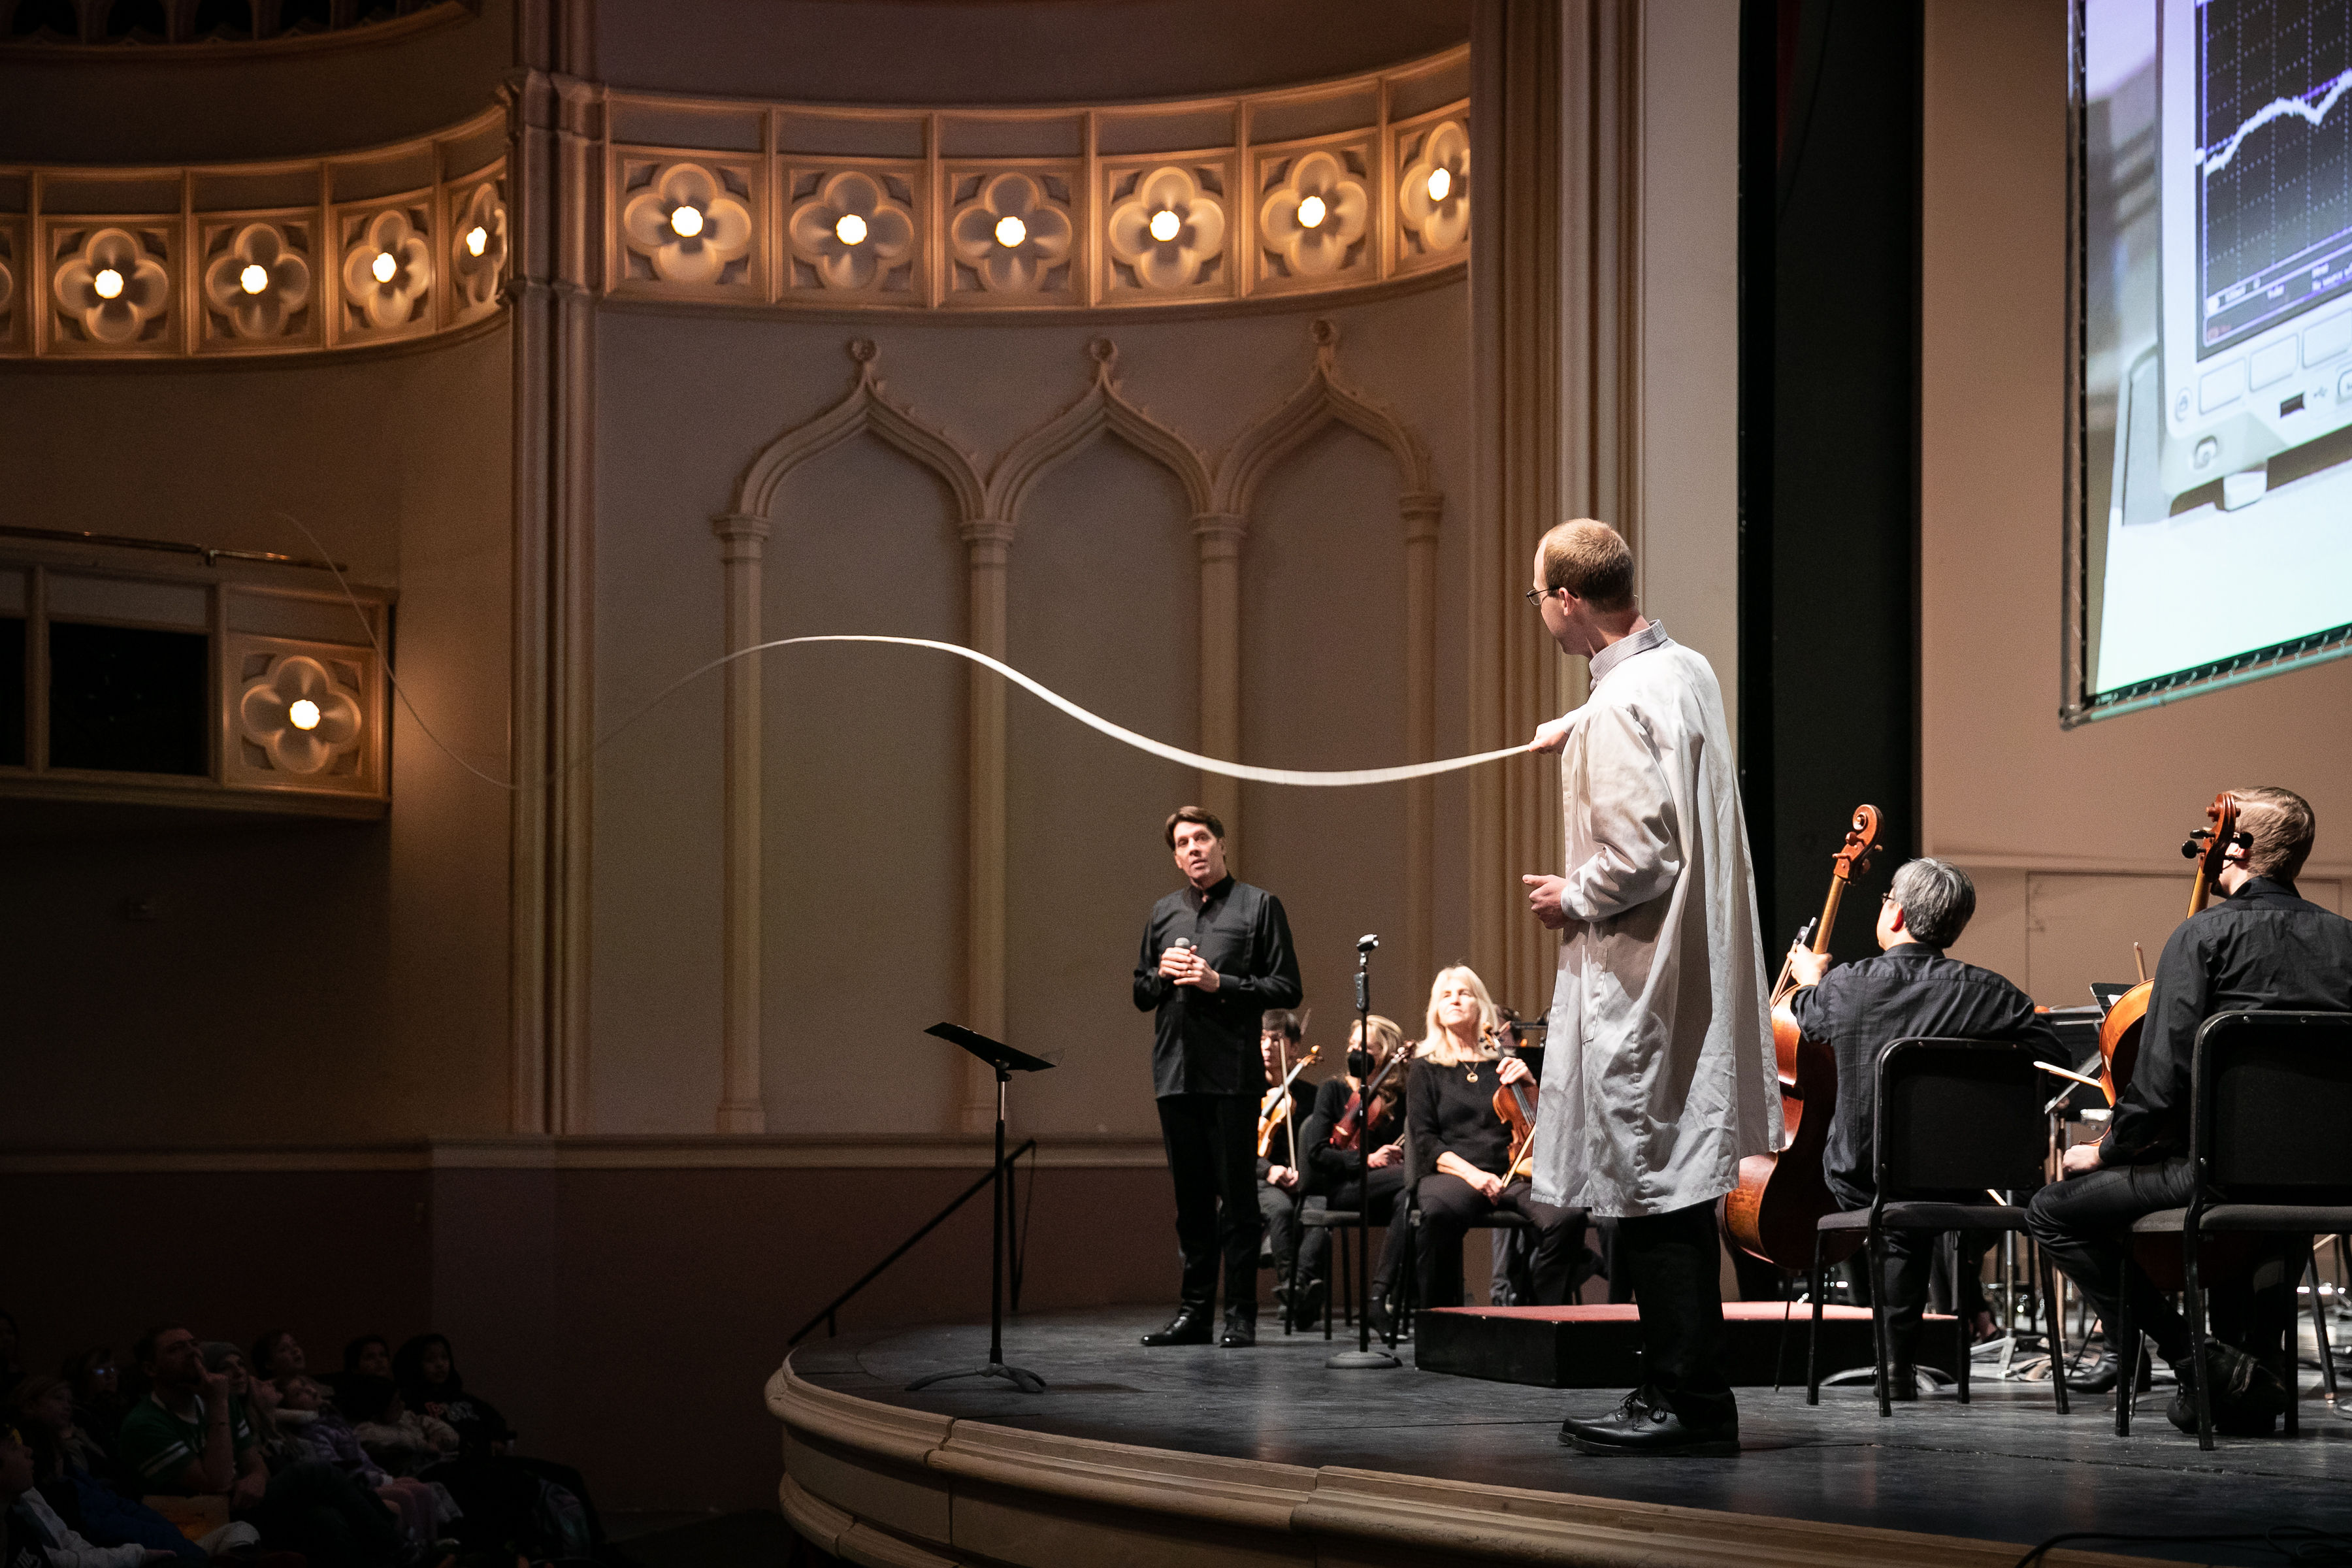 Demonstrating standing waves for a group of middle school students at an orchestra concert.